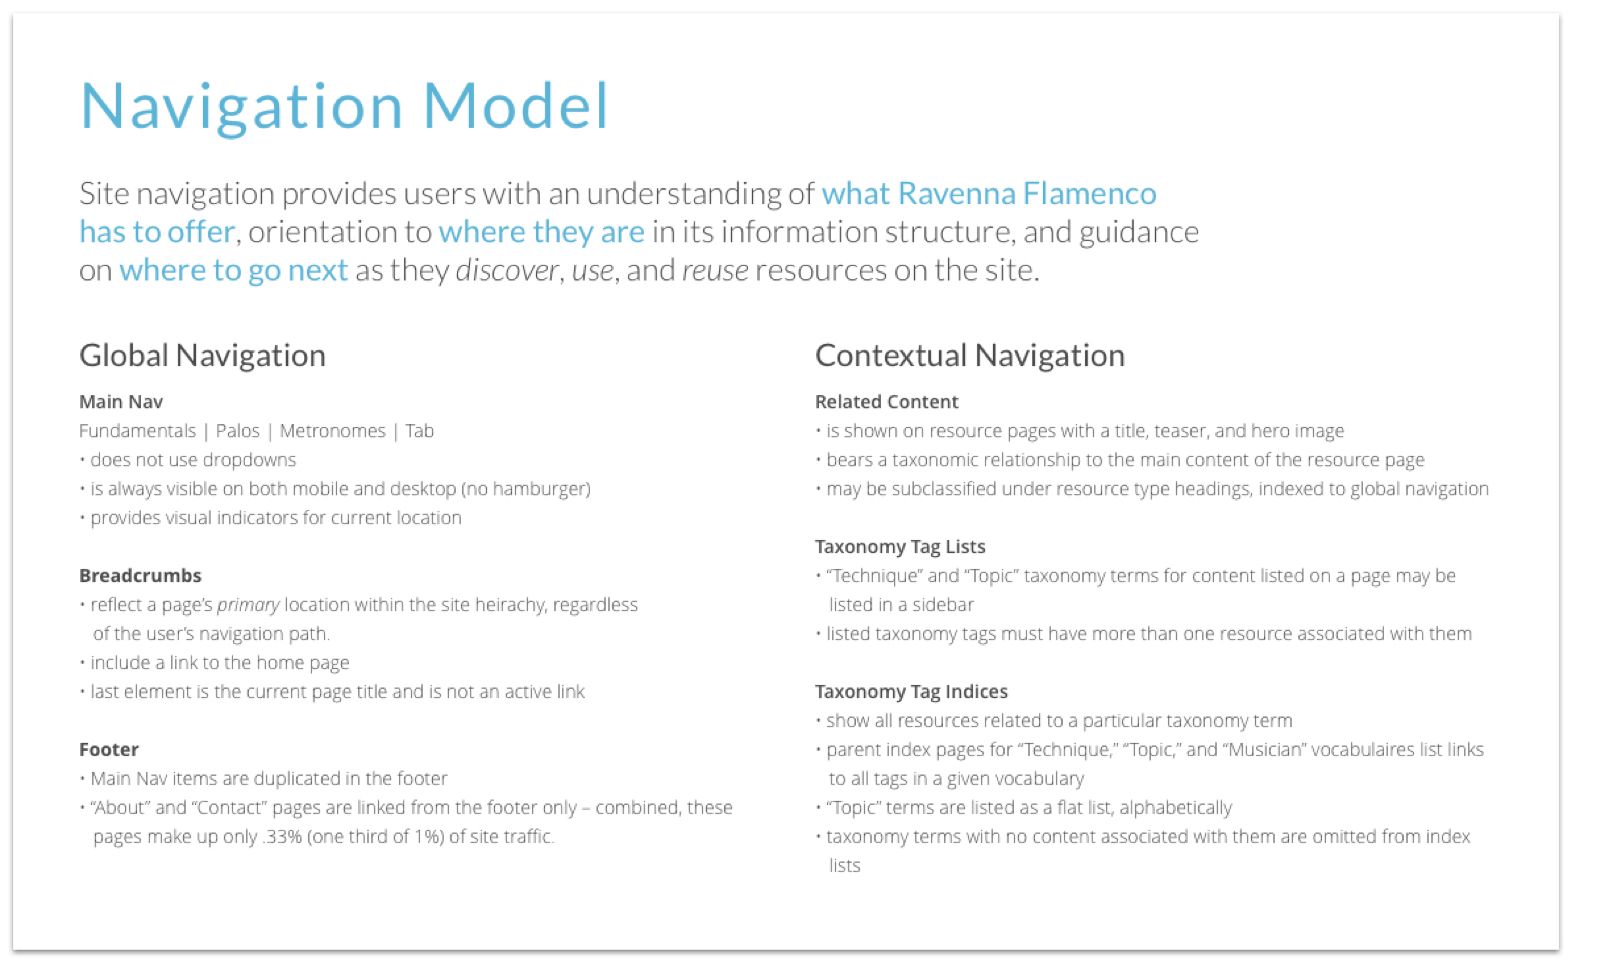 A document describing in text the high level goals of the redesigned Ravenna Flamenco navigation model: Site navigation provides users with an understanding of what Ravenna Flamenco has to offer, orientation to where they are in its information structure, and guidance on where to go next as they discover, use, and reuse resources on the site.